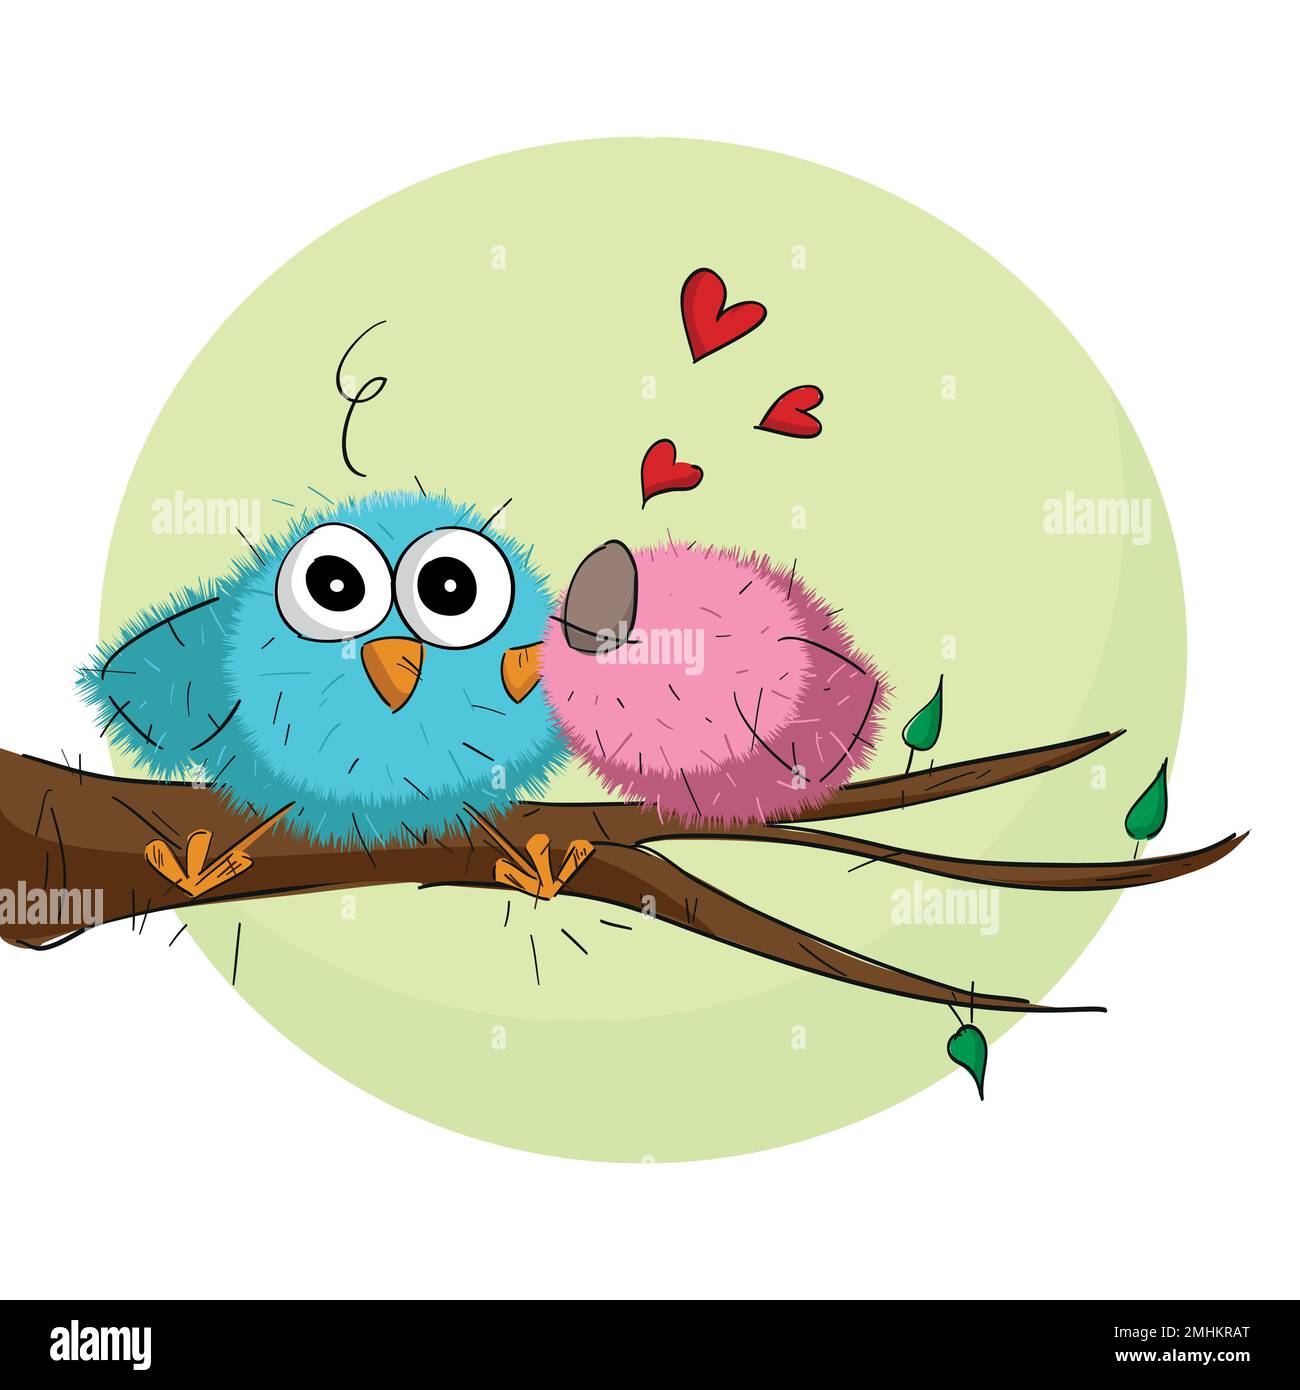 Cute illustration of two little birds kissing on a tree branch with a large moon in the background. Valentine's Day Card Stock Vector